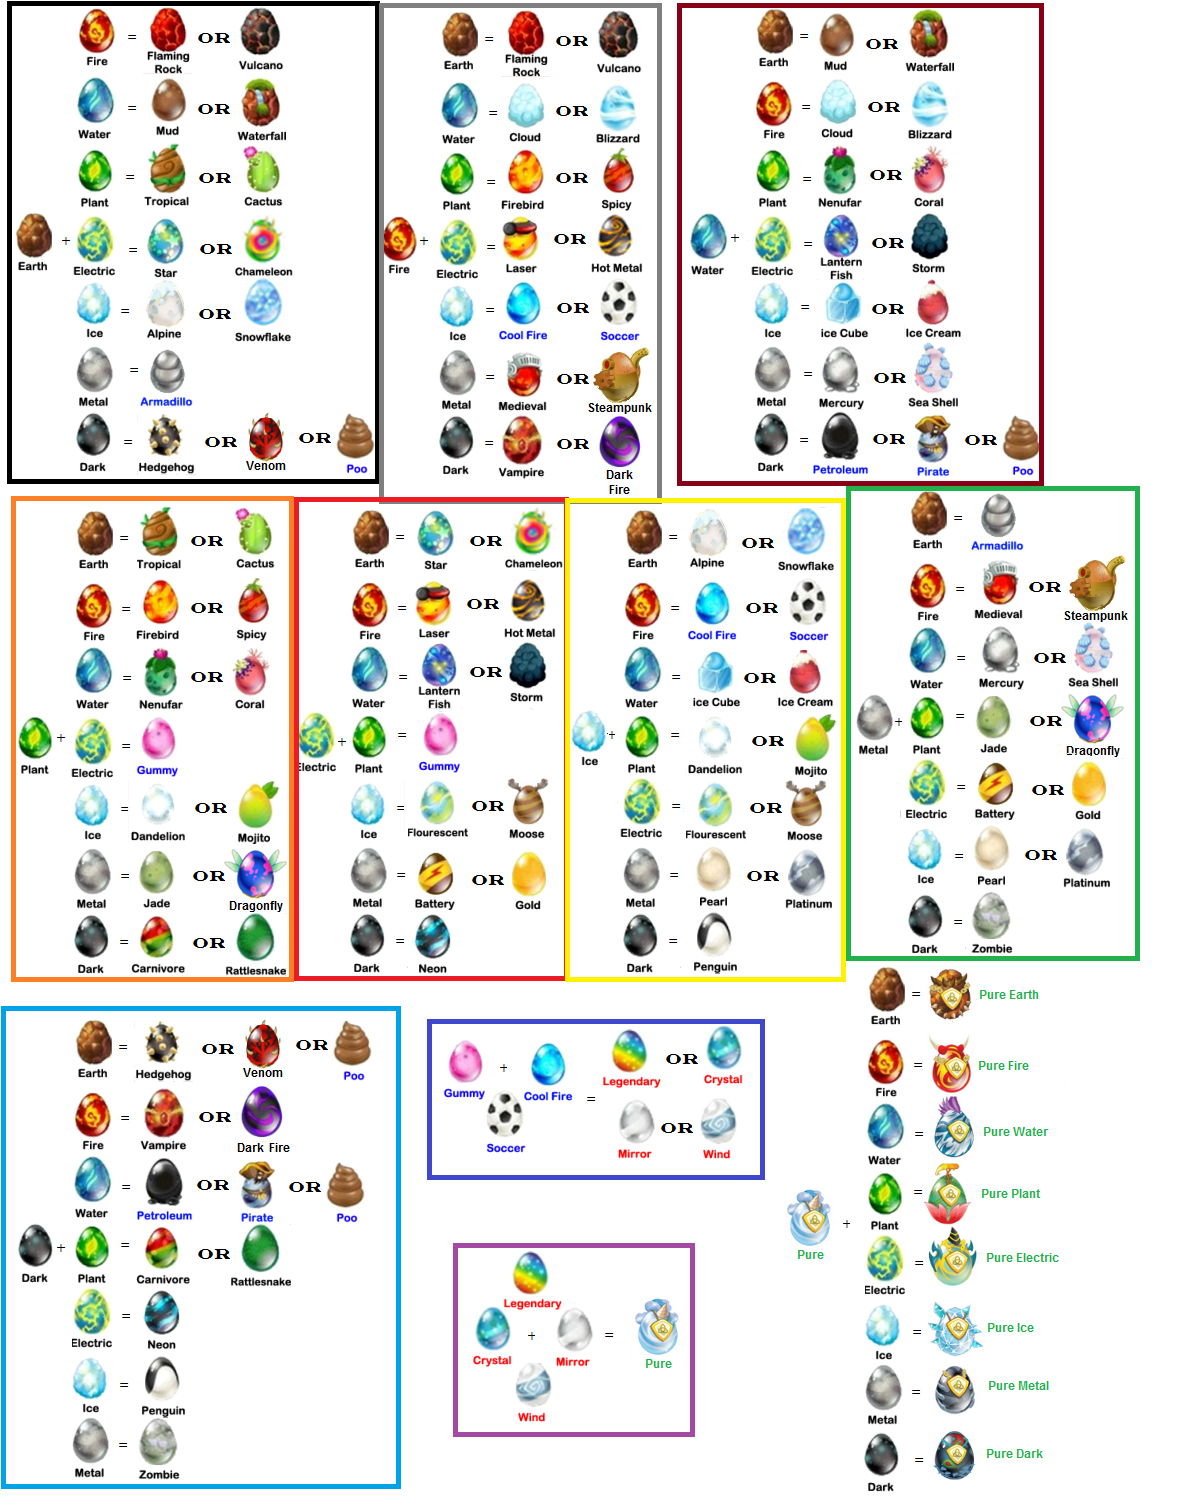 dragon city breeding guide ice and fire